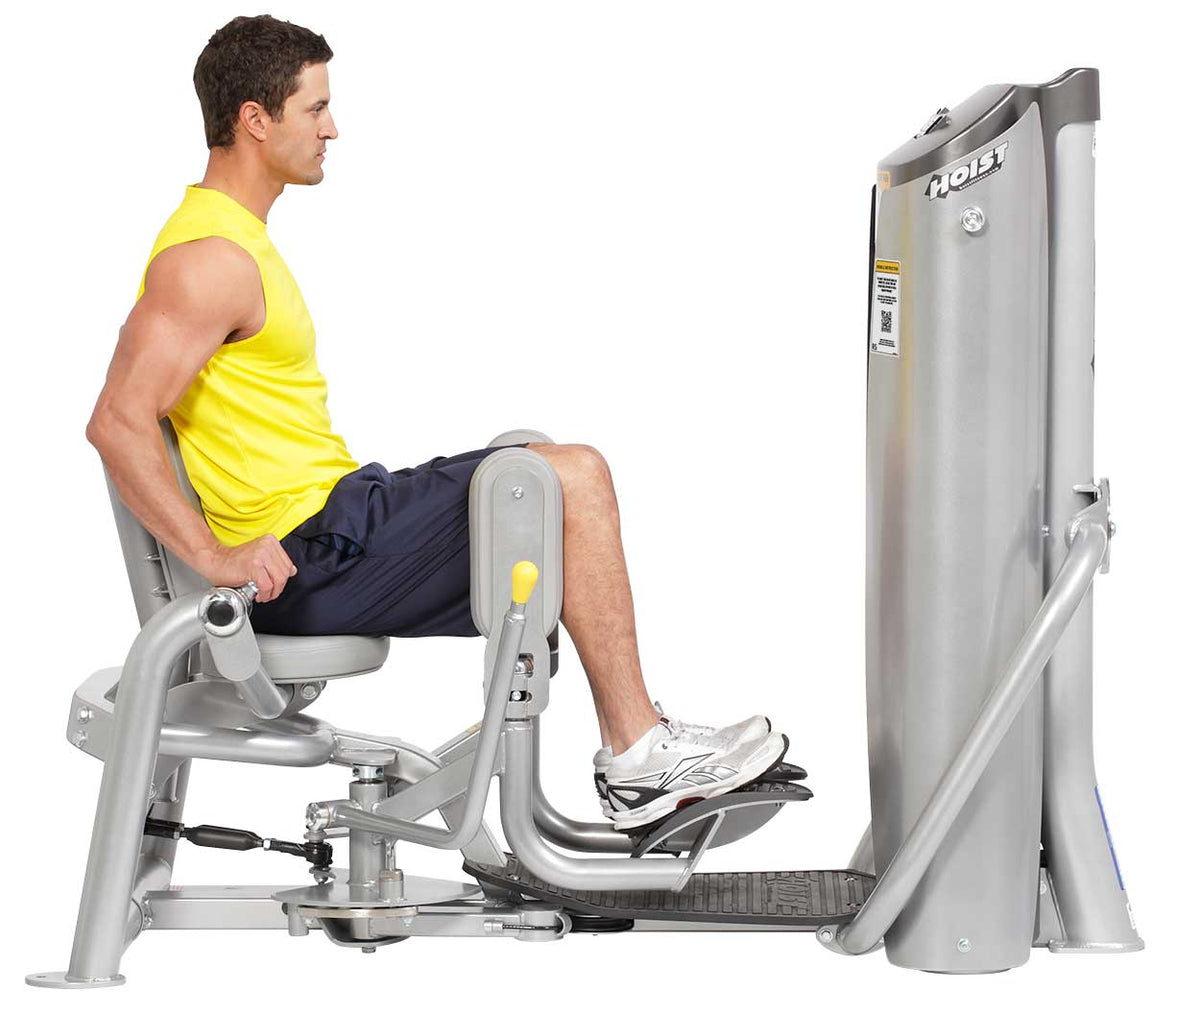 Hoist Fitness RS-1407 Outer Thigh side view | Fitness Experience